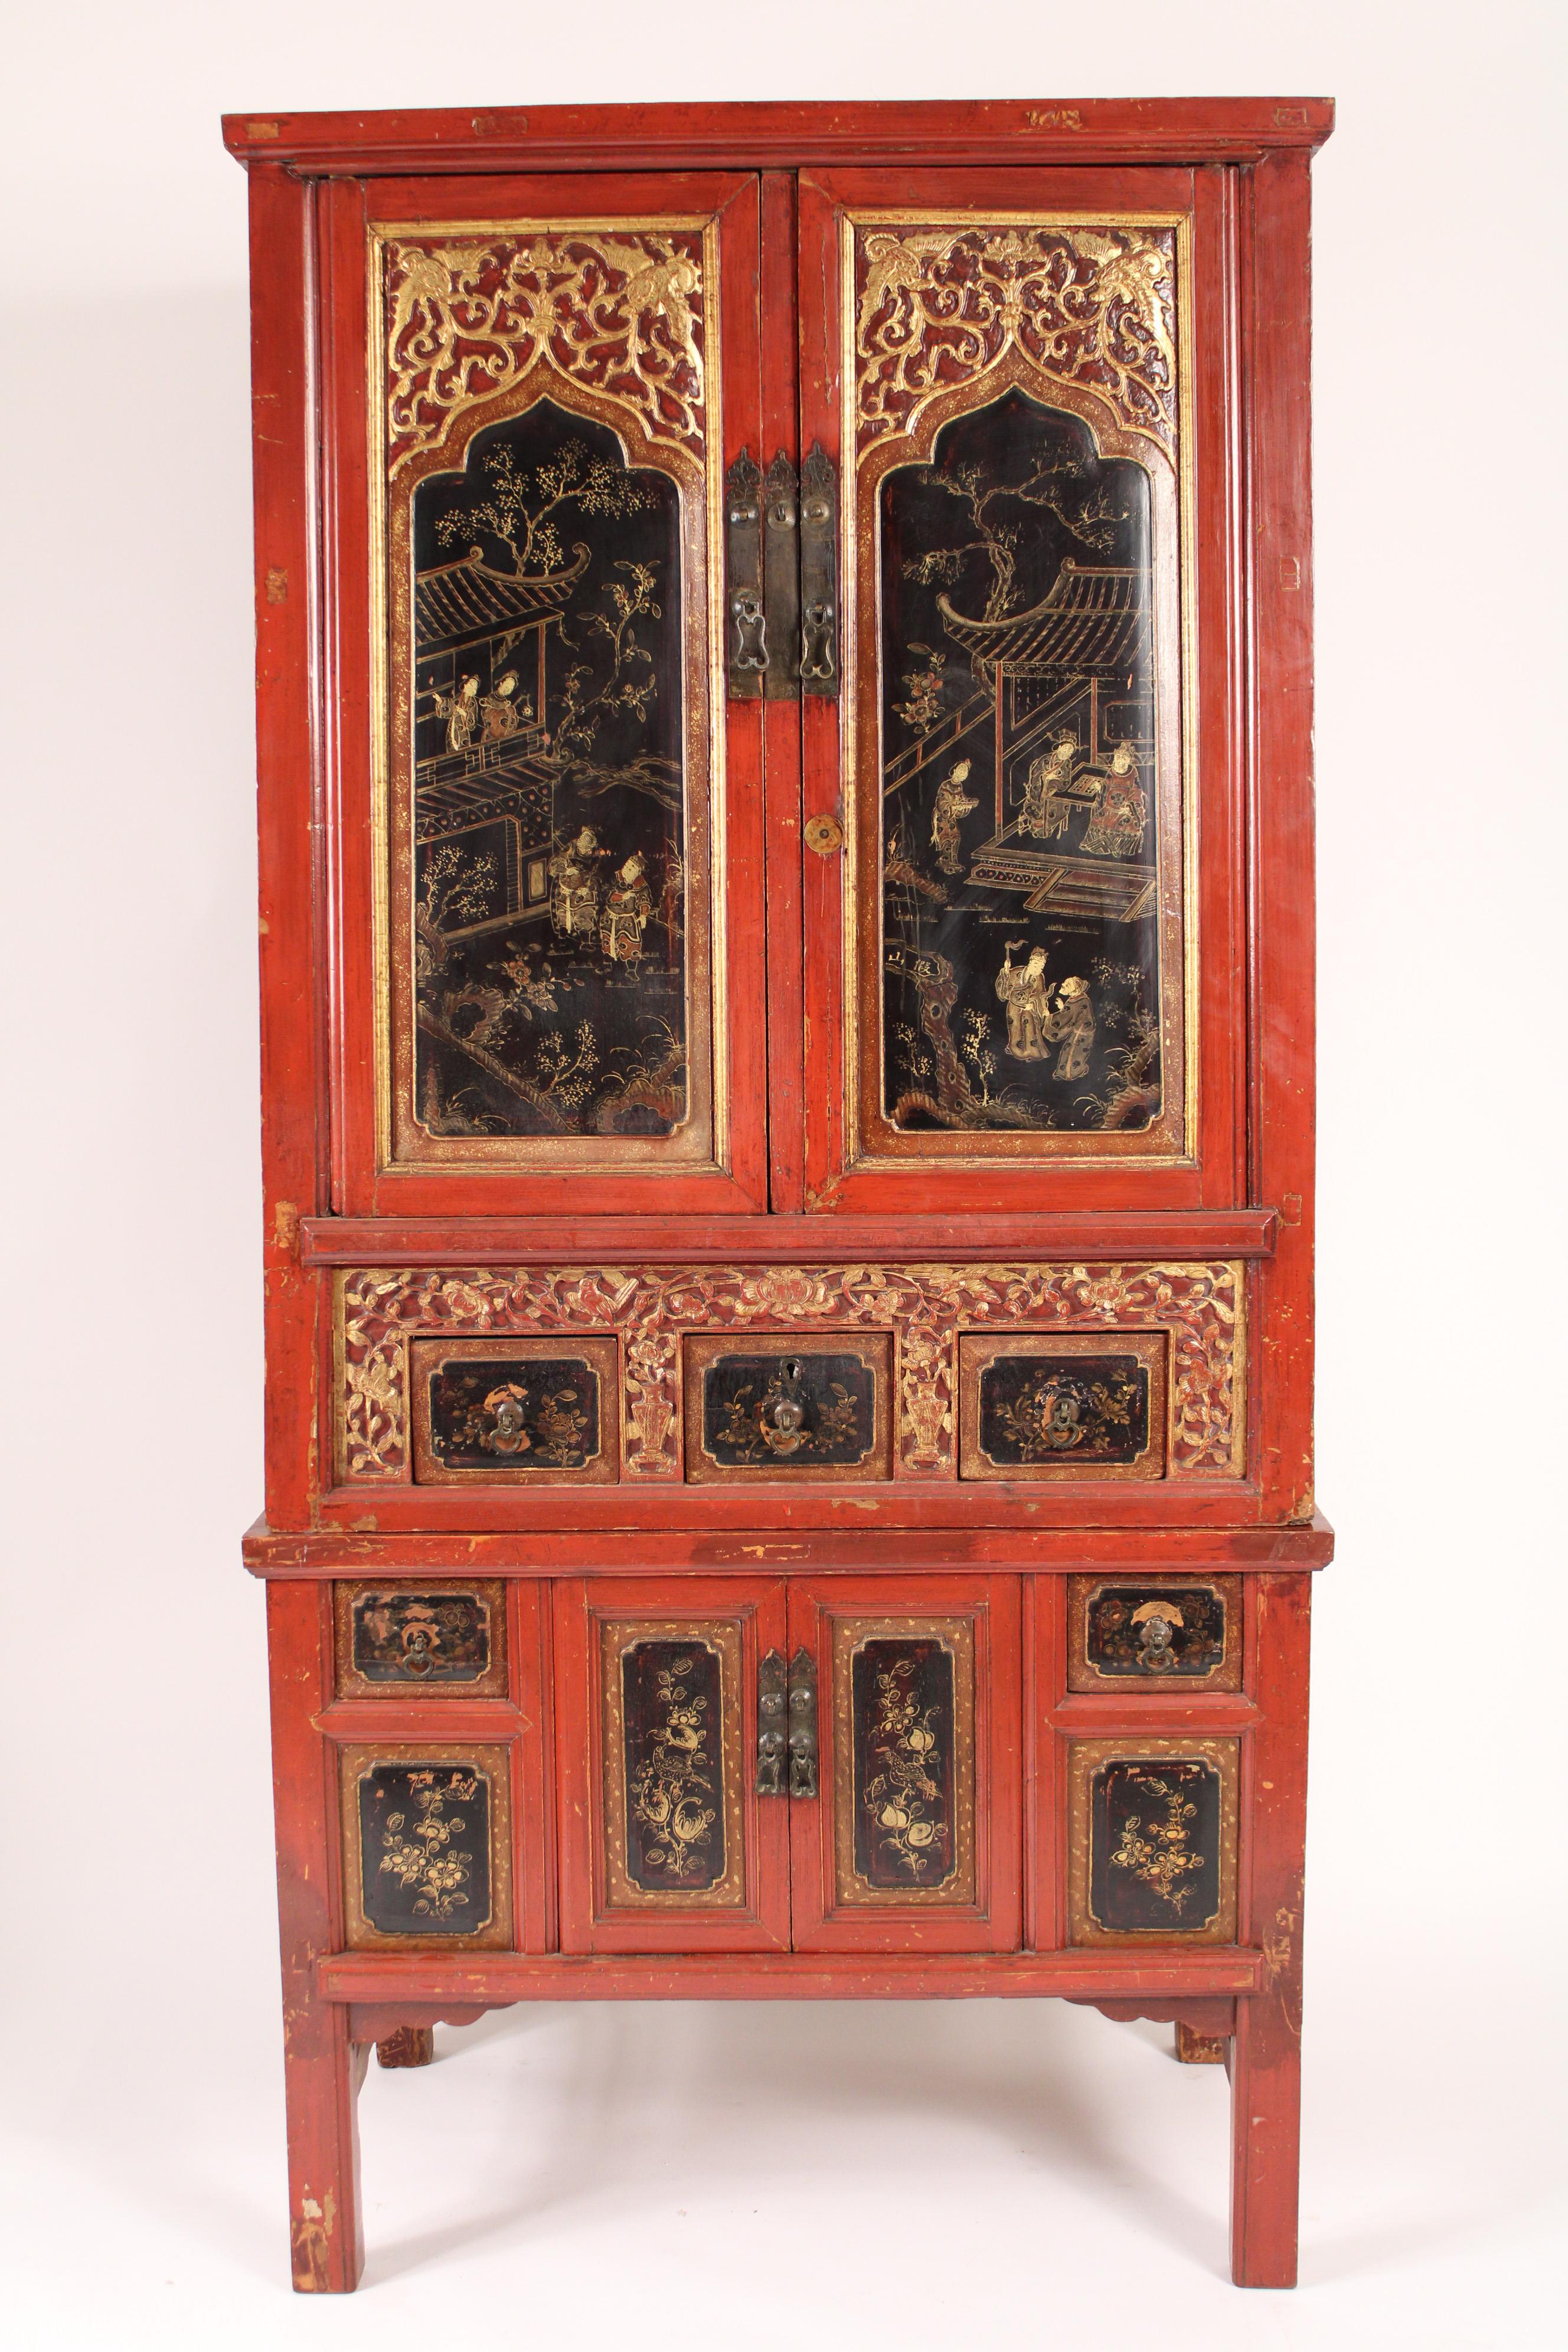 Chinese red, black and gilt chinoiserie decorated cabinet, circa mid 20th century. The upper black lacquer doors with Chinese figures in tea houses, the bottom black lacquer drawers and doors with floral designs. The cabinet having two upper doors,